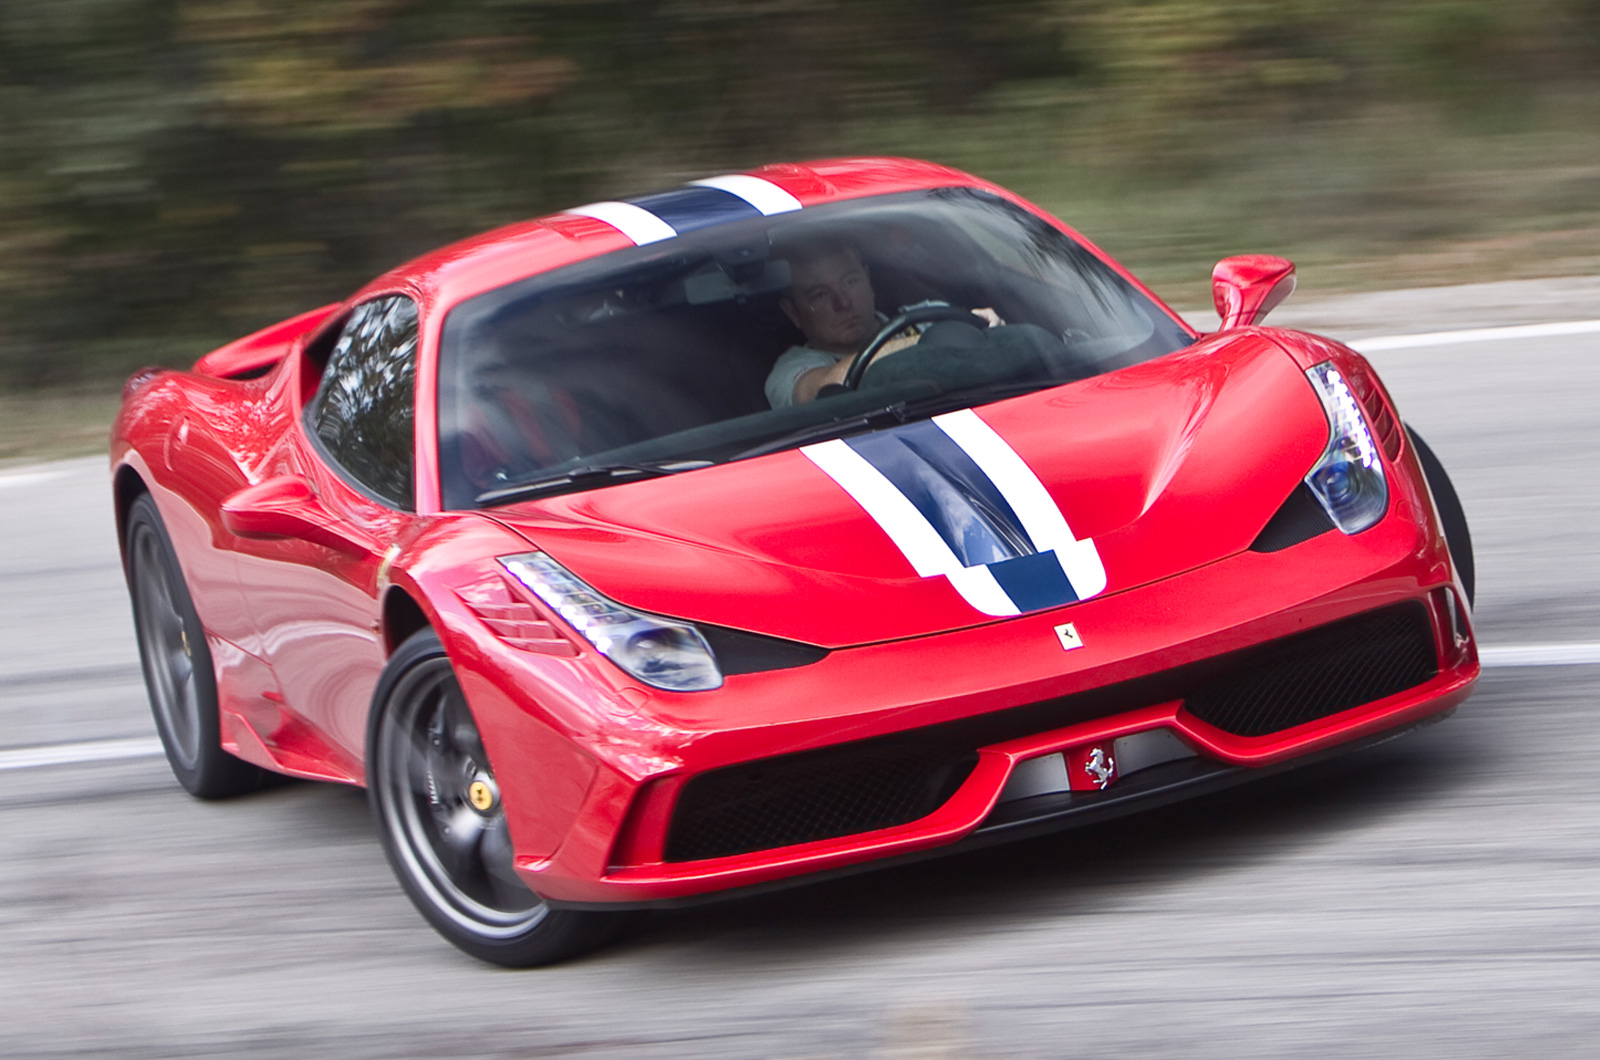 Speciale first drive